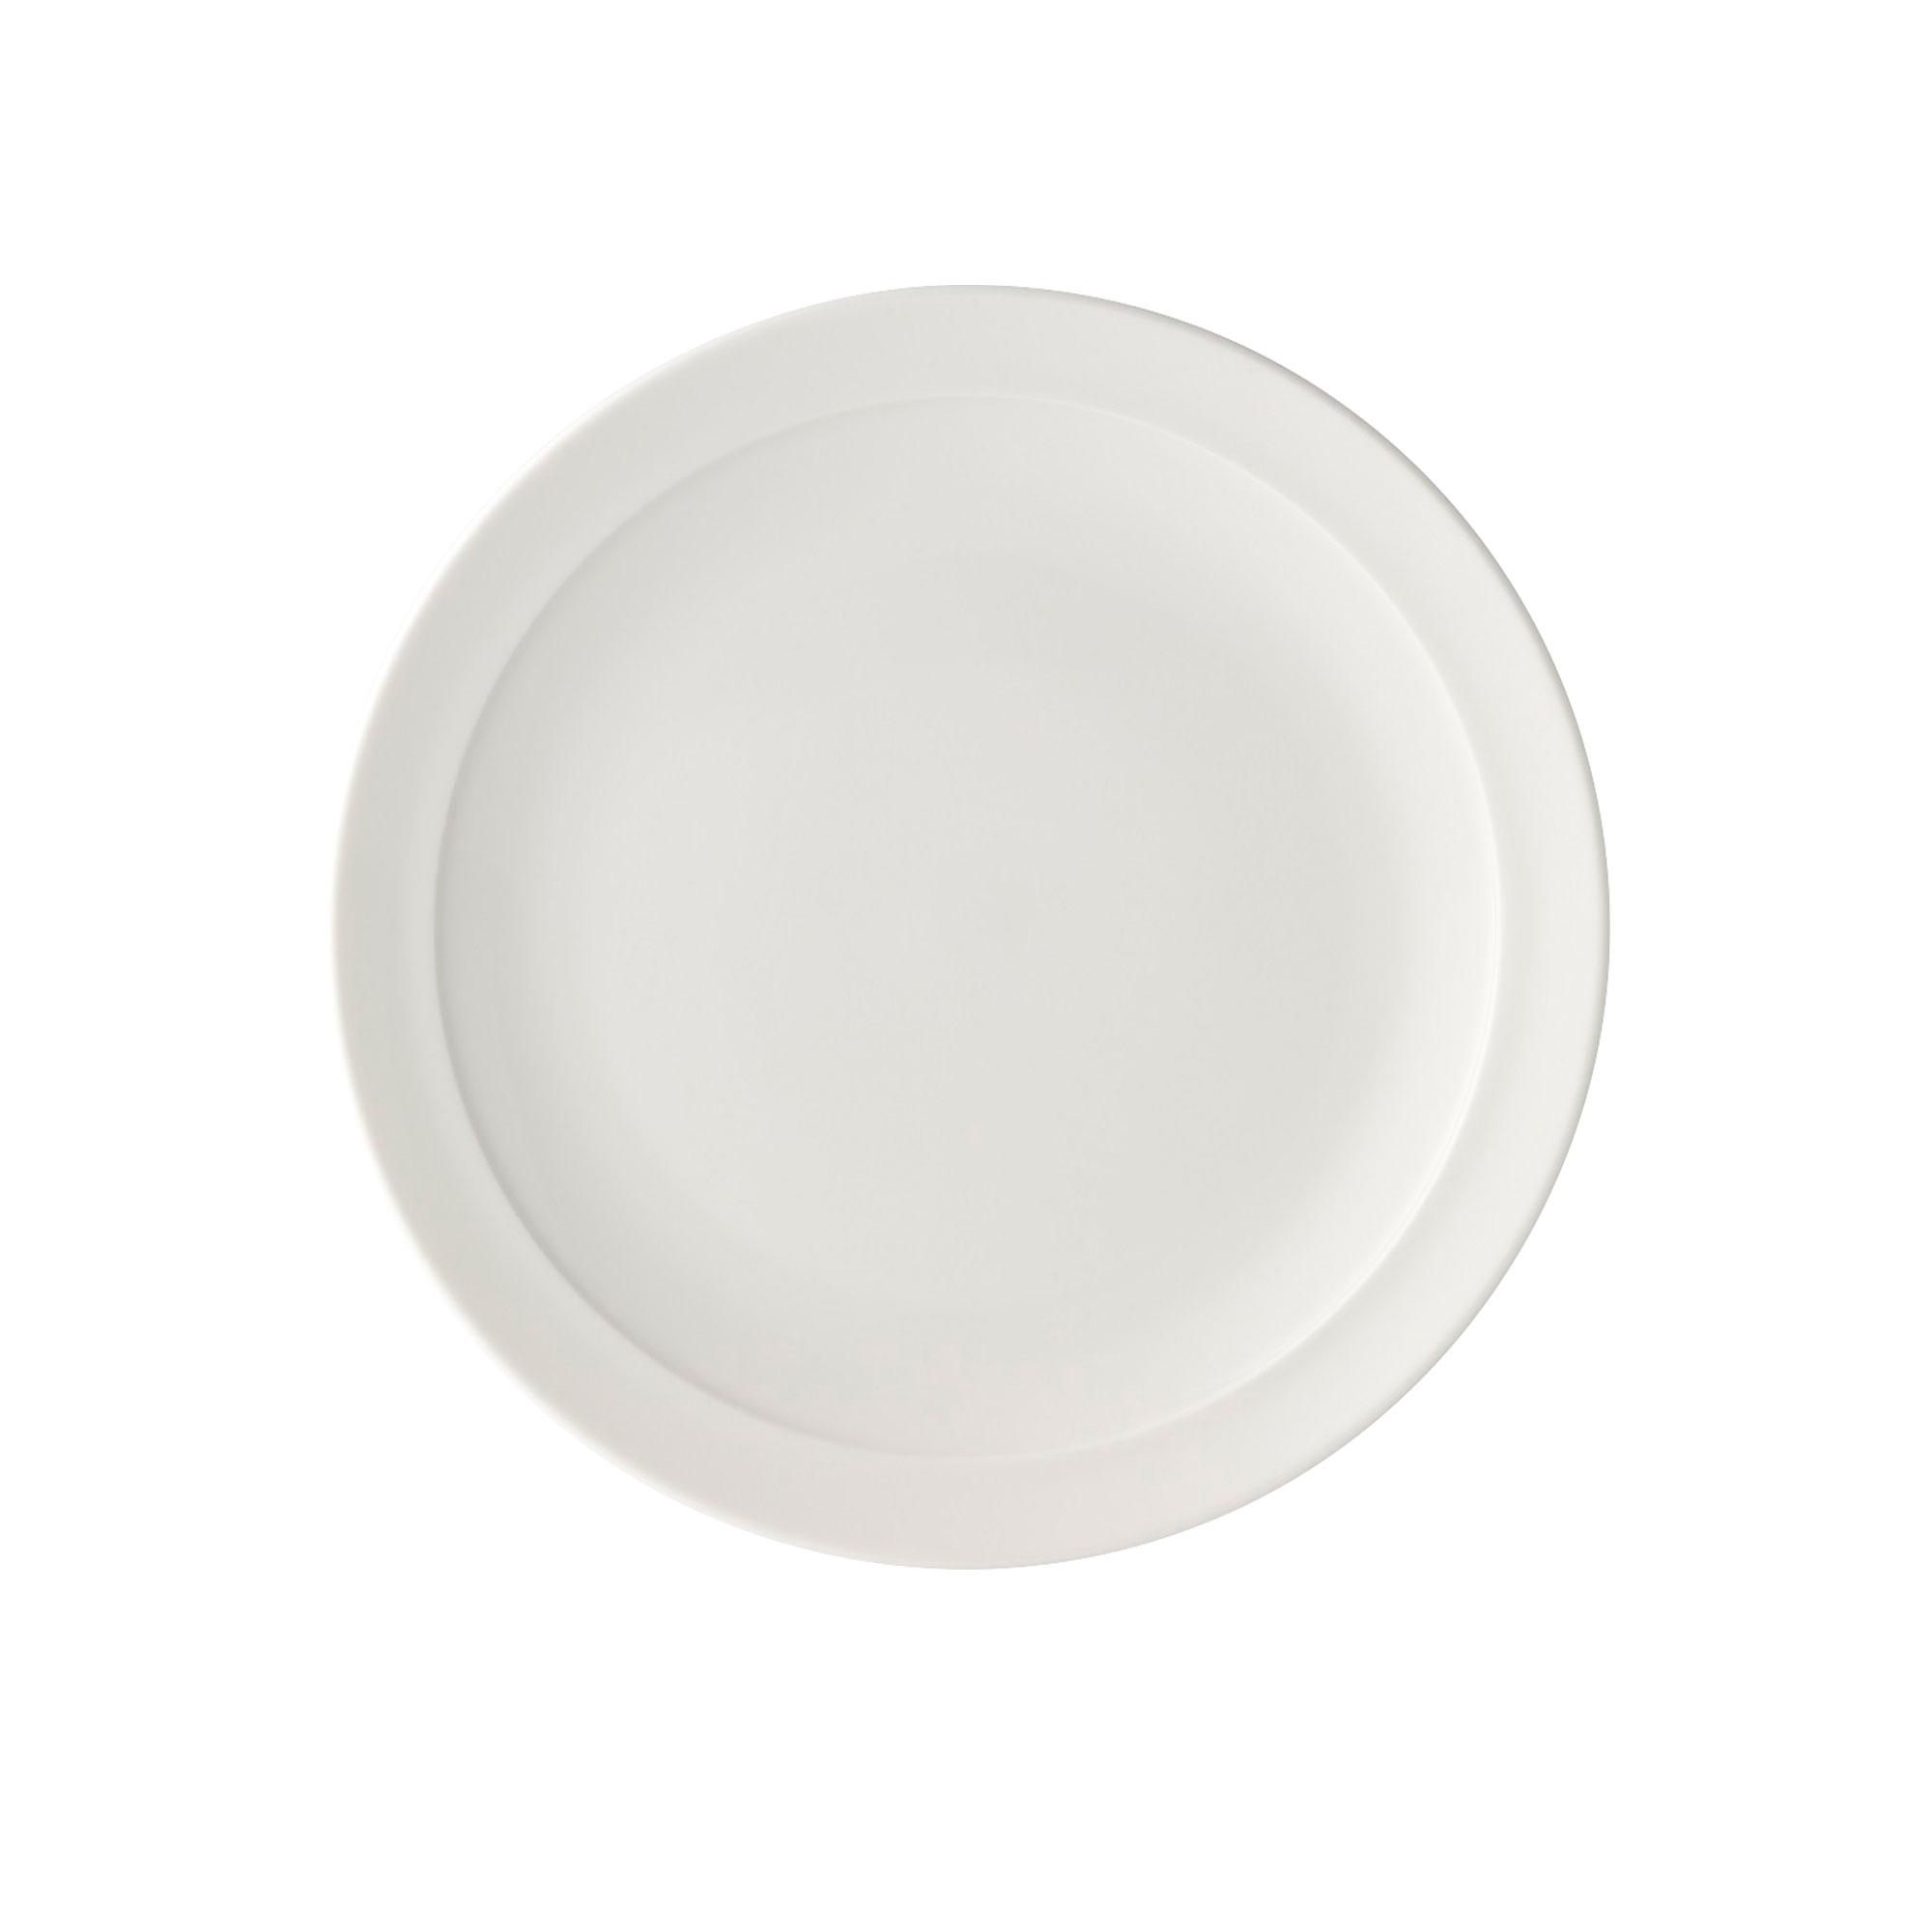 Noritake Everyday by Adam Liaw Side Plate 21cm Set of 4 White Image 5